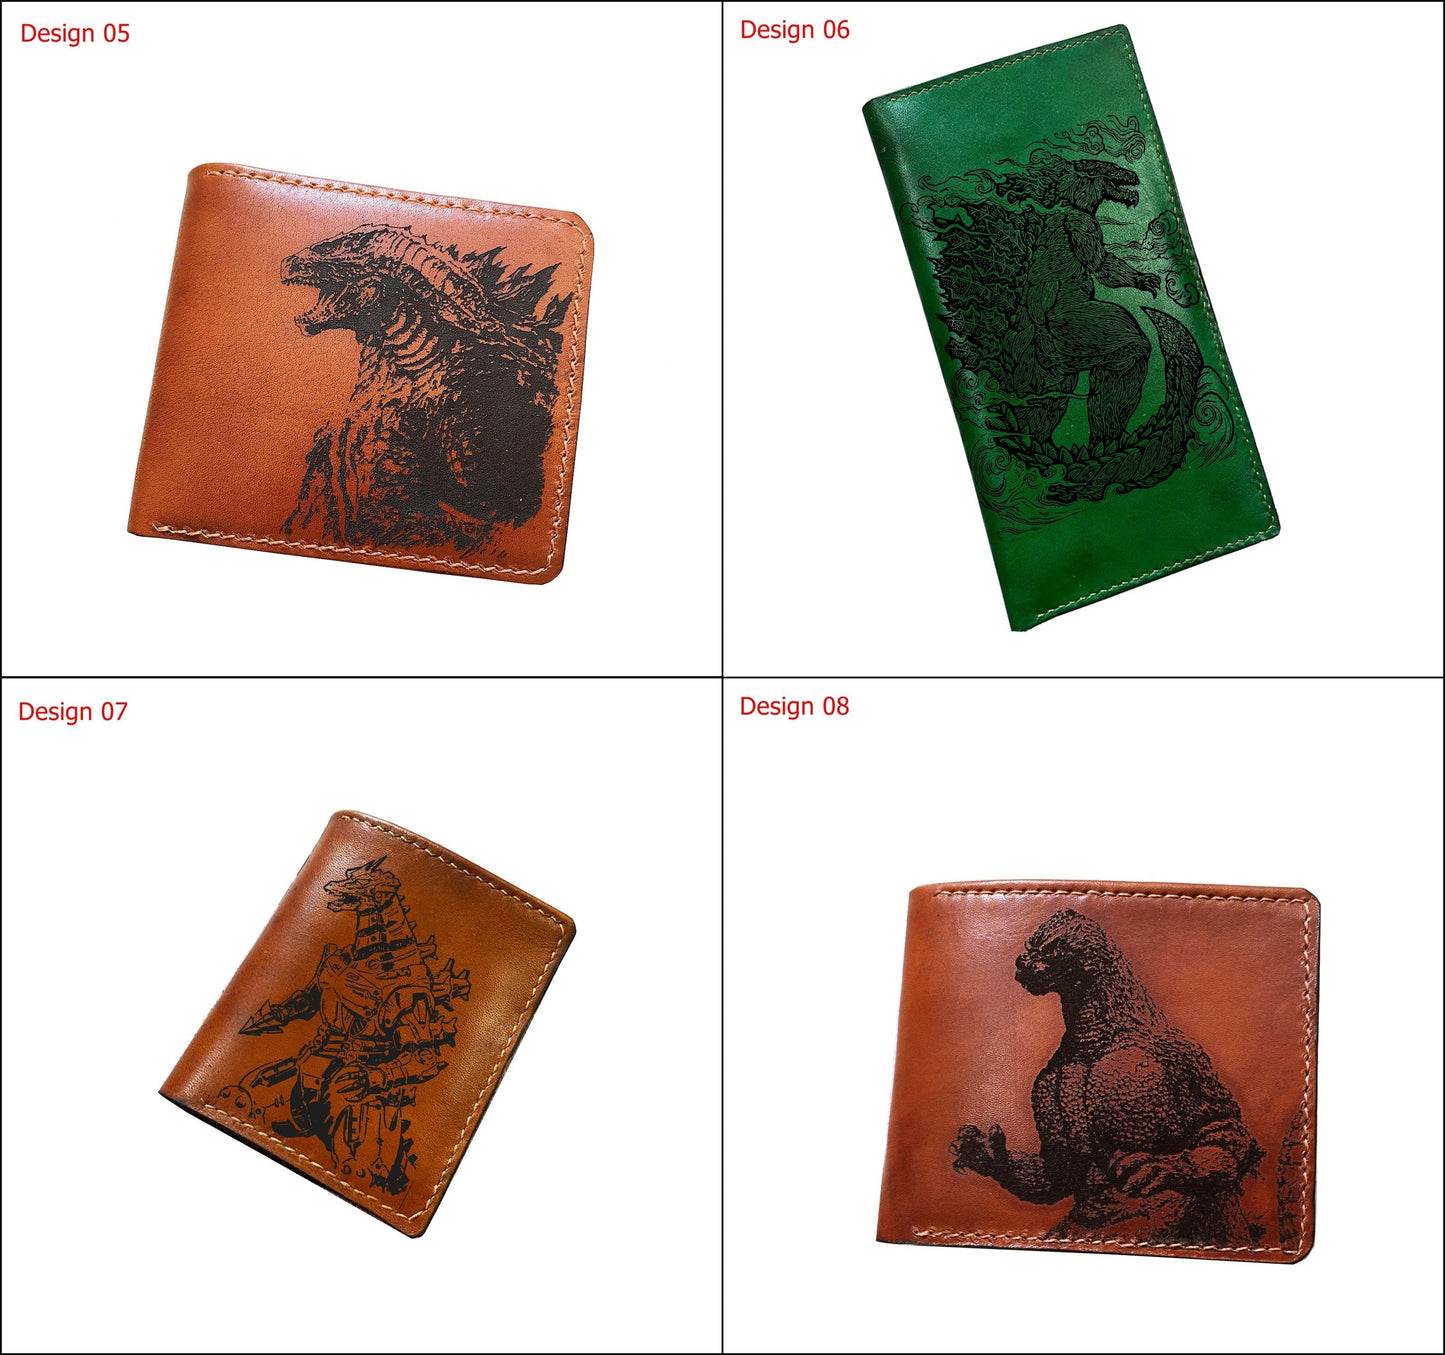 Mayan Corner - Godzilla shadow leather men's wallet, monster king wallet, birthday gifts ideas for dad, husband, brother